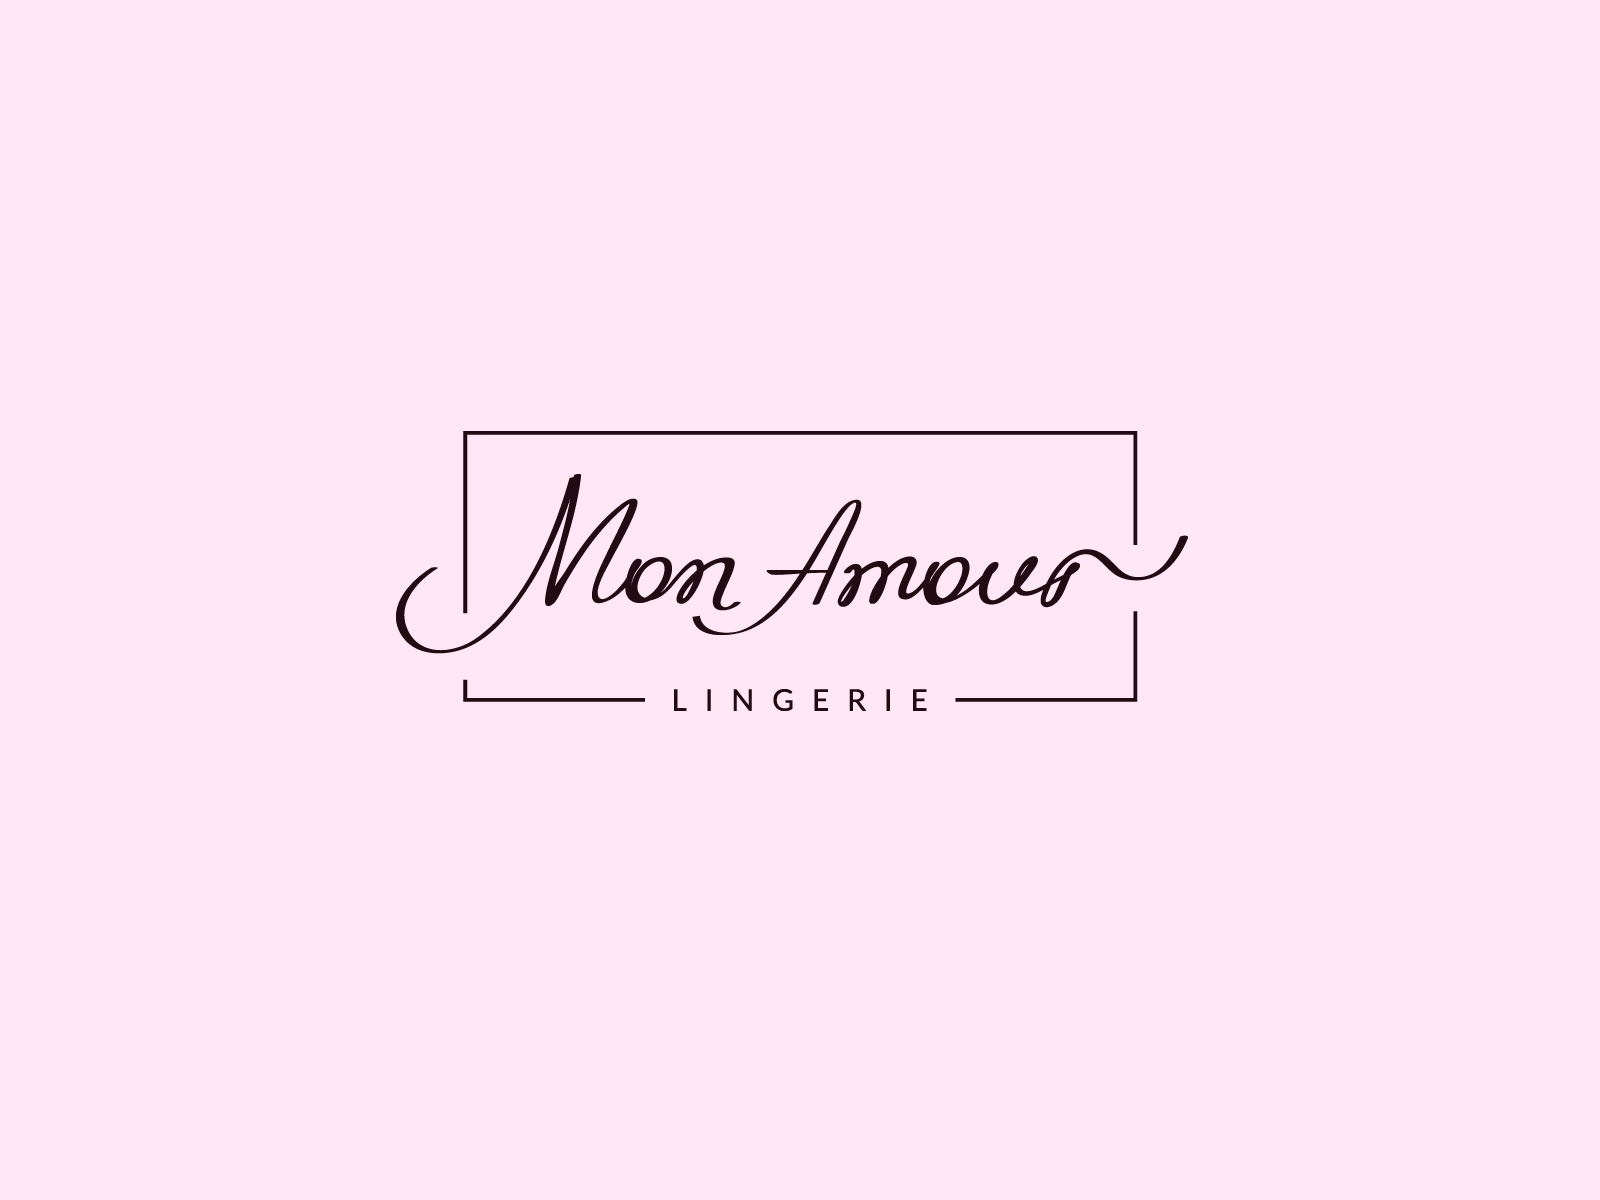 Mon Amour by Ivan Andreev on Dribbble